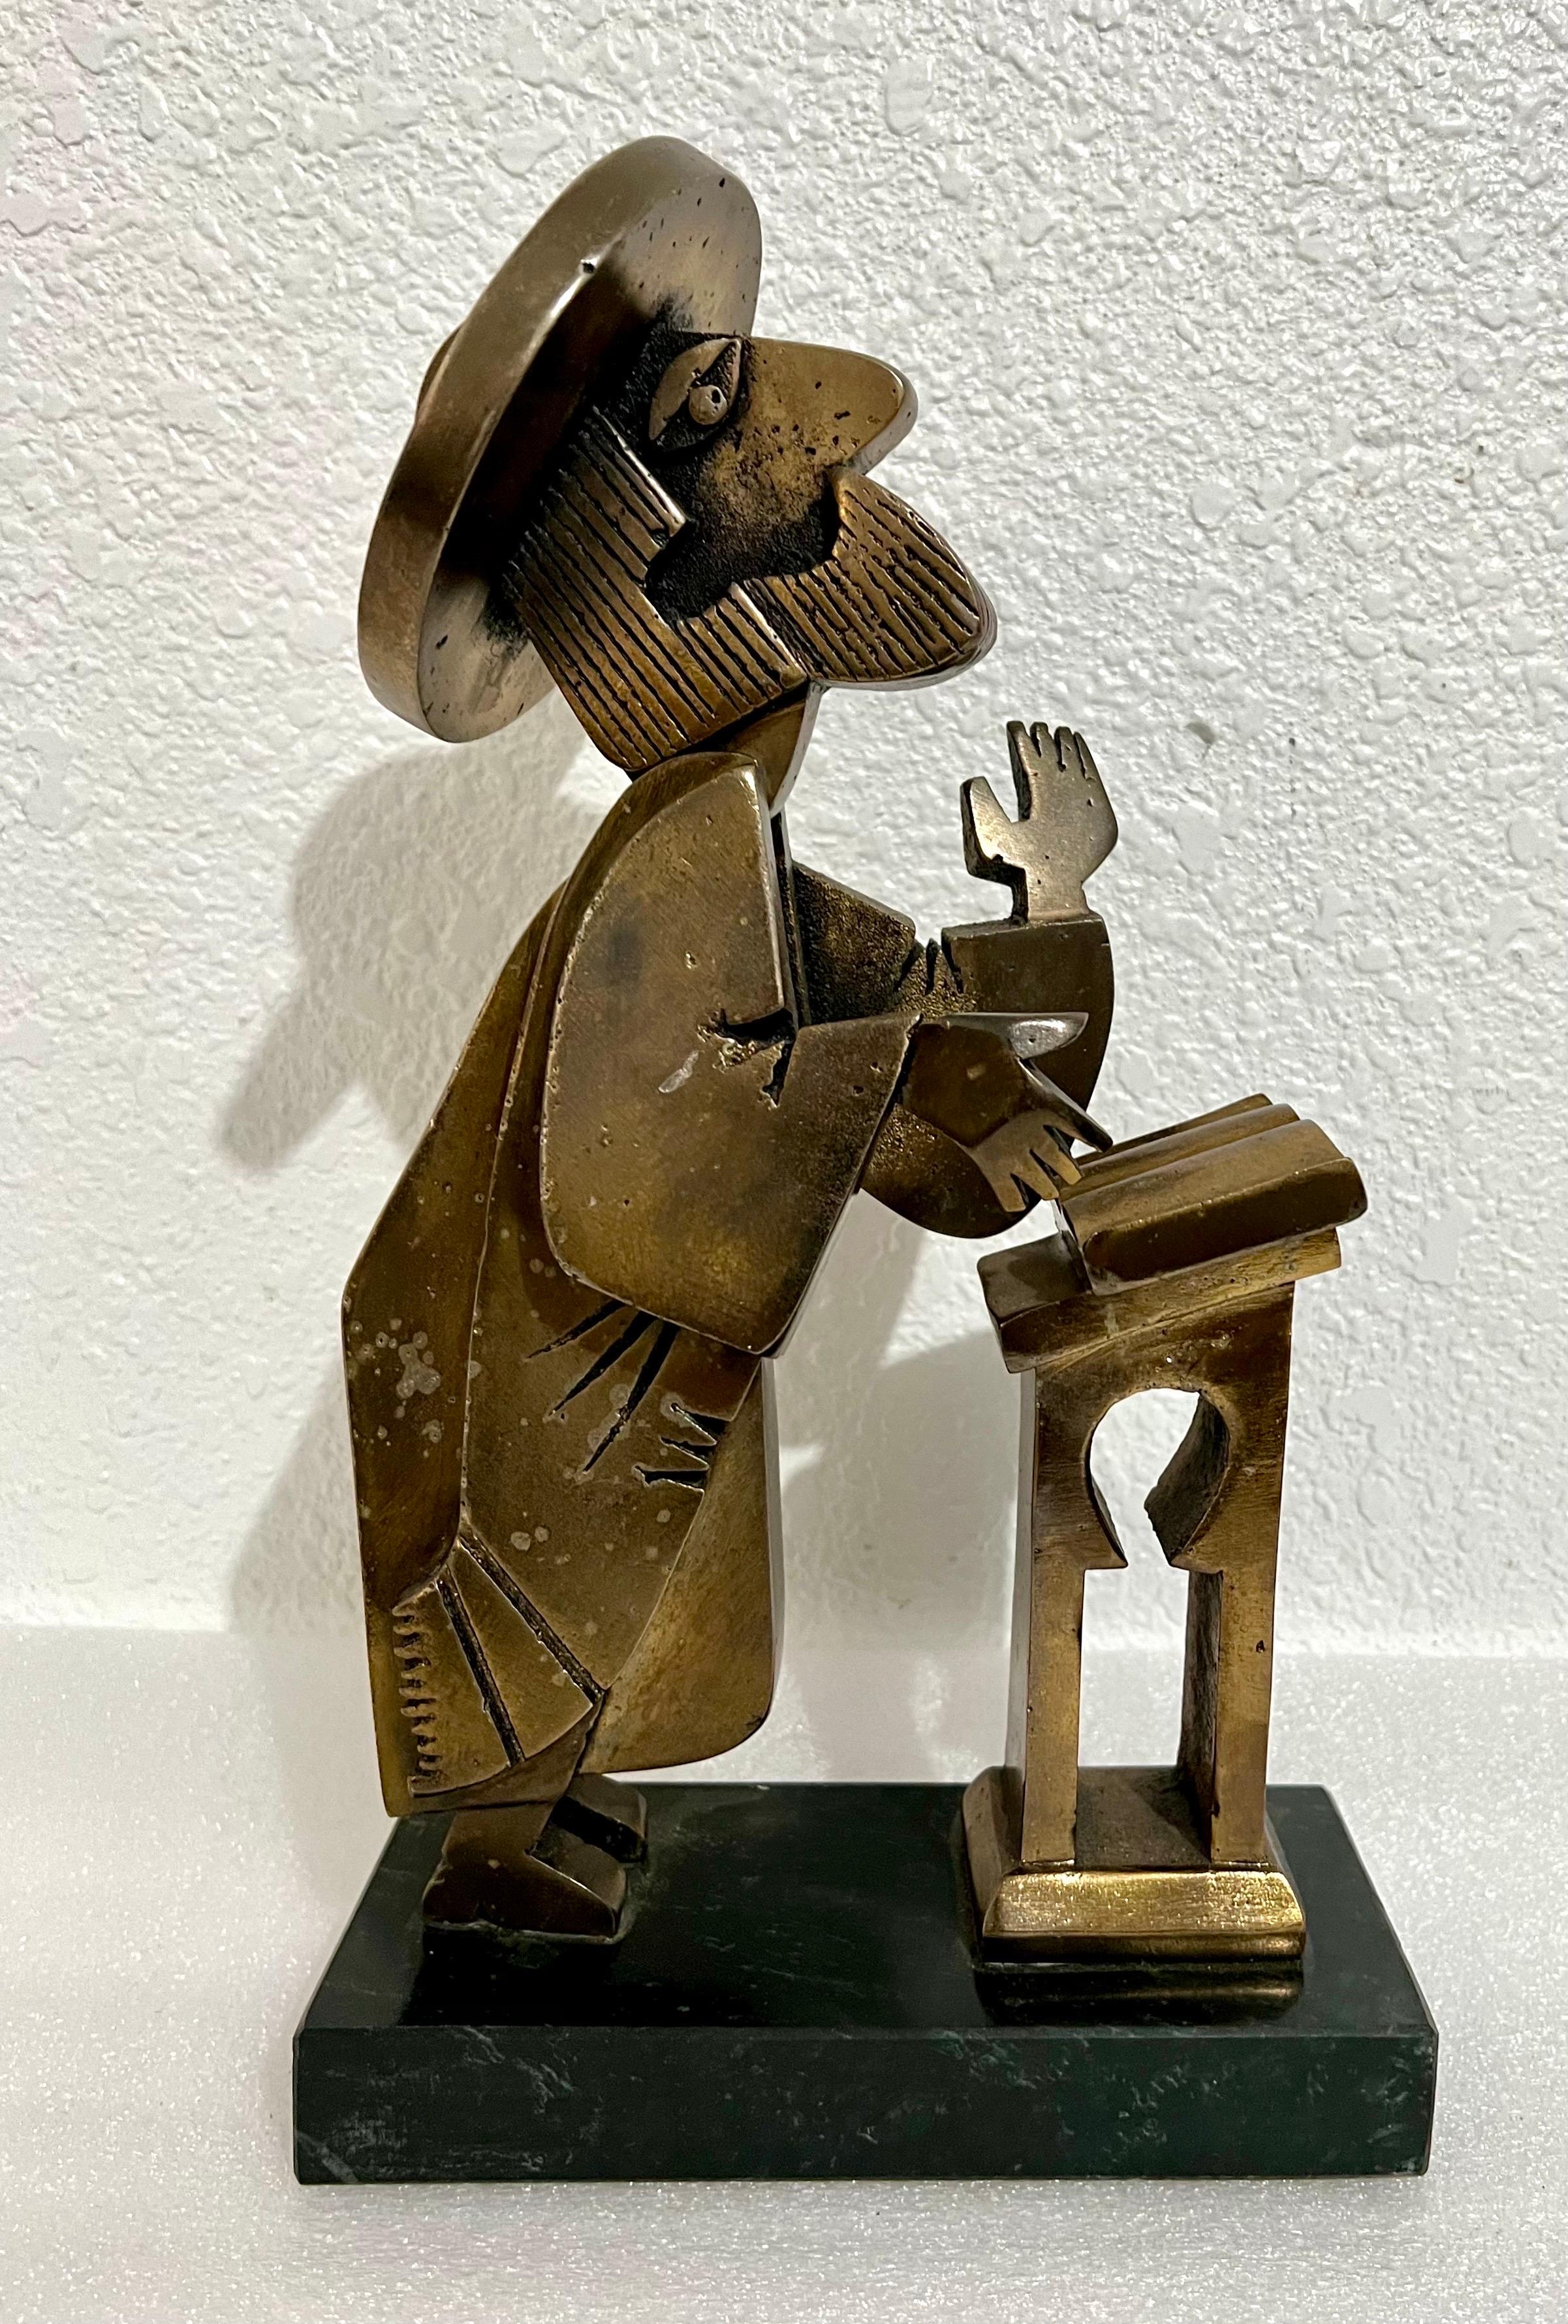 Rare Vintage unusual piece.
In this bronze or metal sculpture by Frank Meisler, the artist recreates a Rabbi at prayer. The figure seems cartoon-like with exaggerated facial features. the head is kinetic and bobs back and forth. you can tilt it back